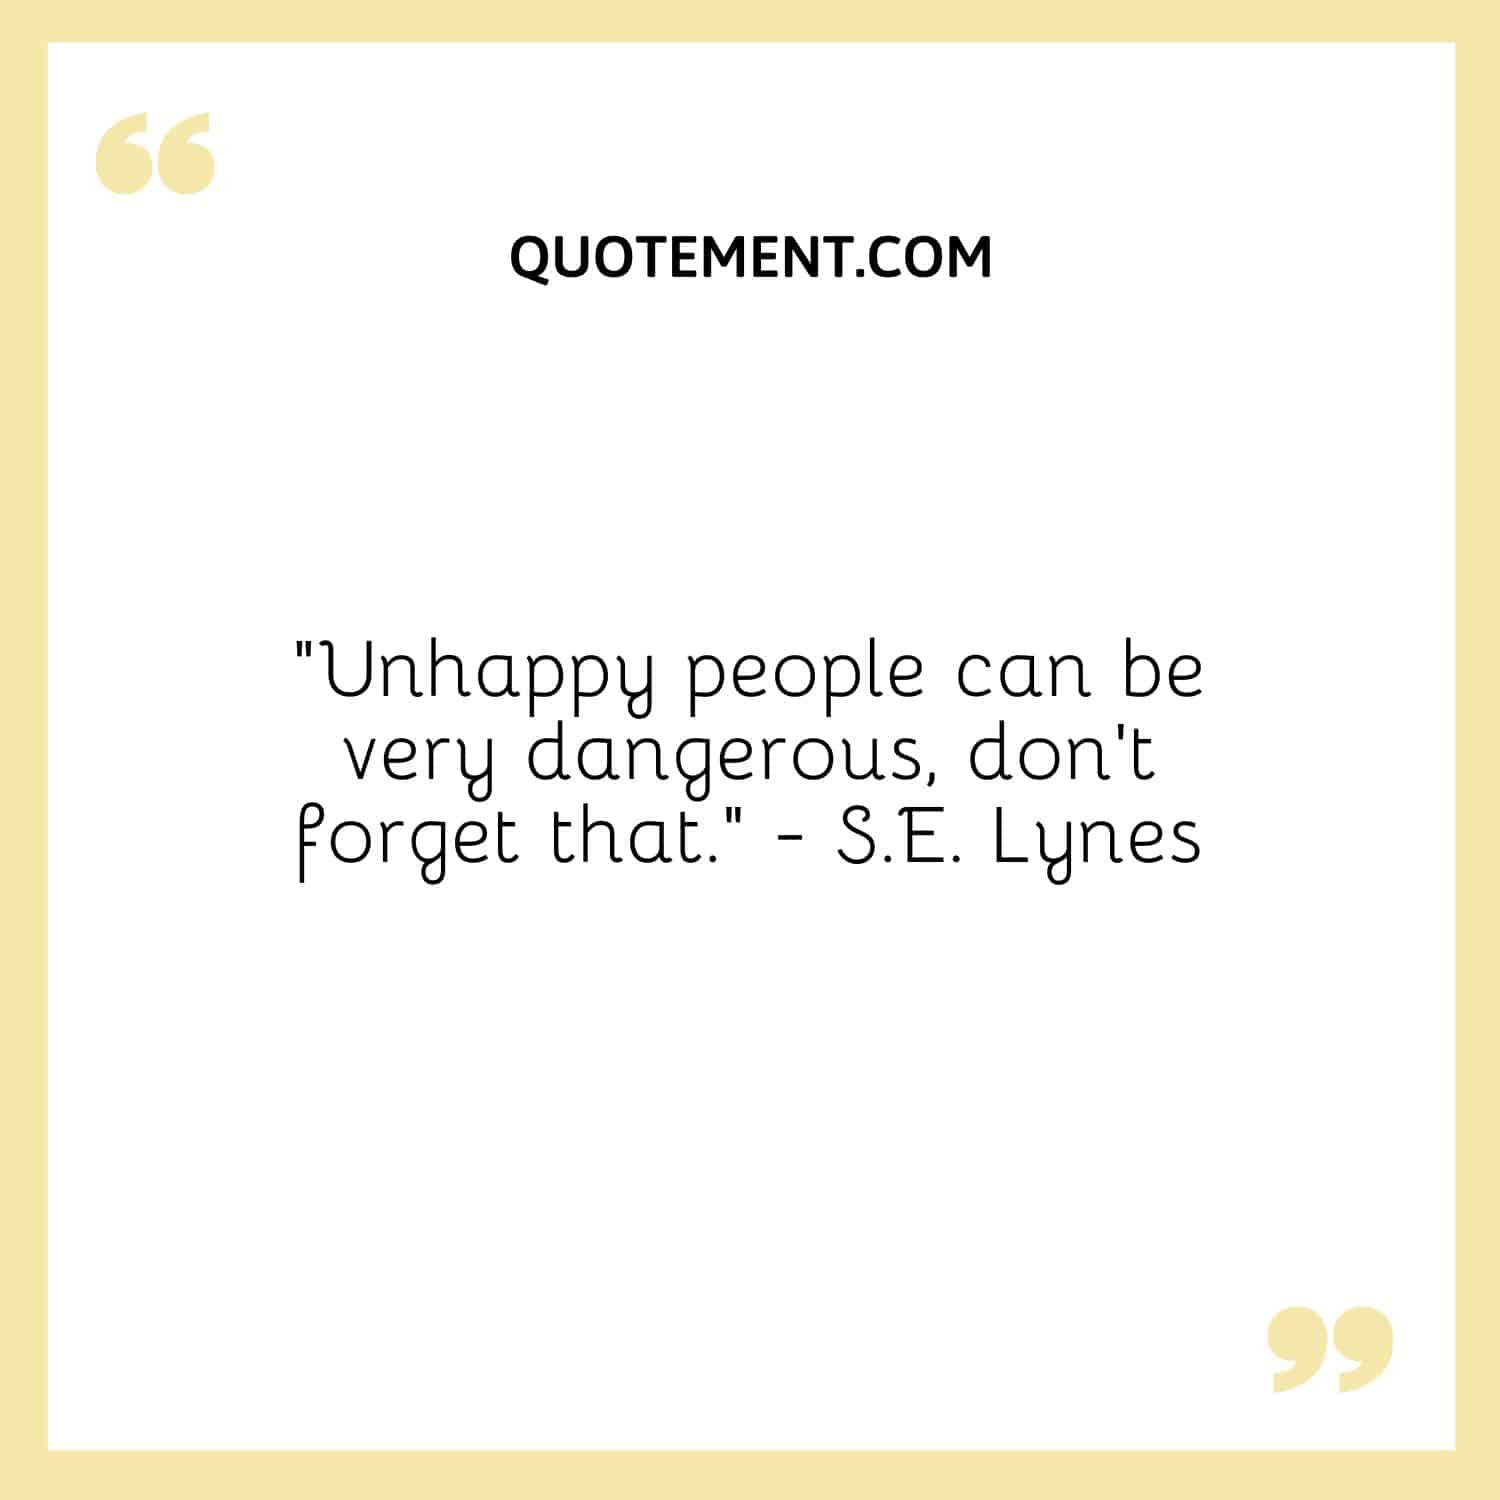 “Unhappy people can be very dangerous, don’t forget that.” - S.E. Lynes